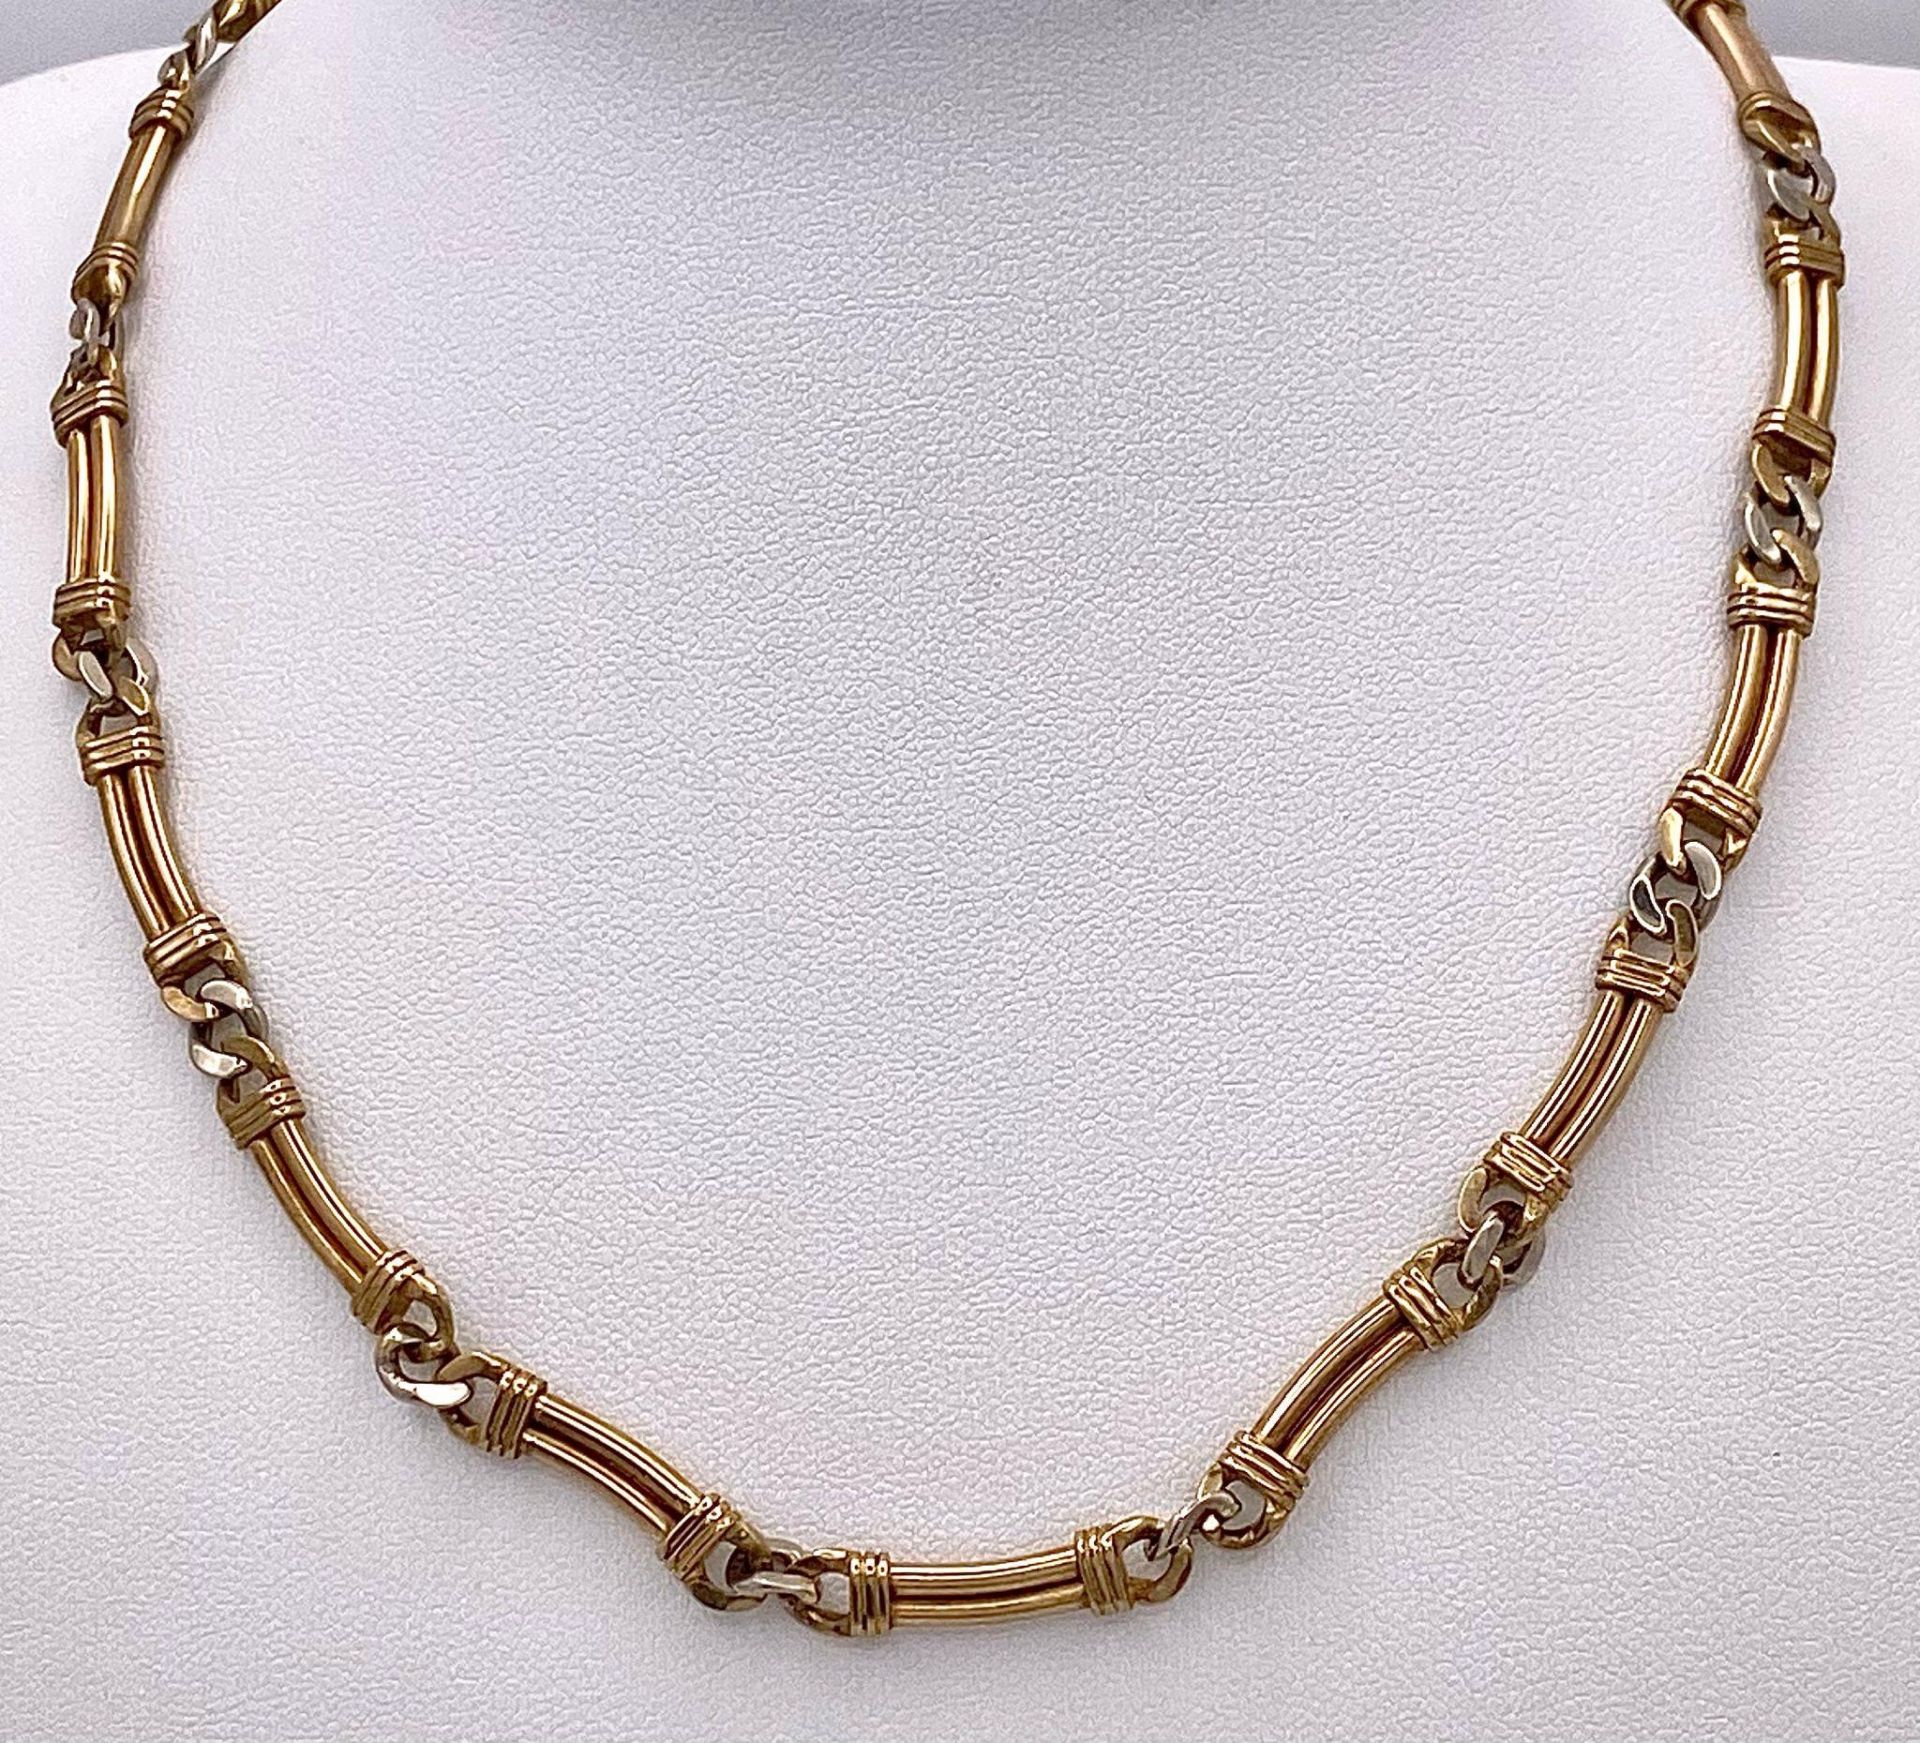 A Vintage 9K Yellow Gold Double Bar Necklace with Curb Spacers. 40cm. 21.2g weight.